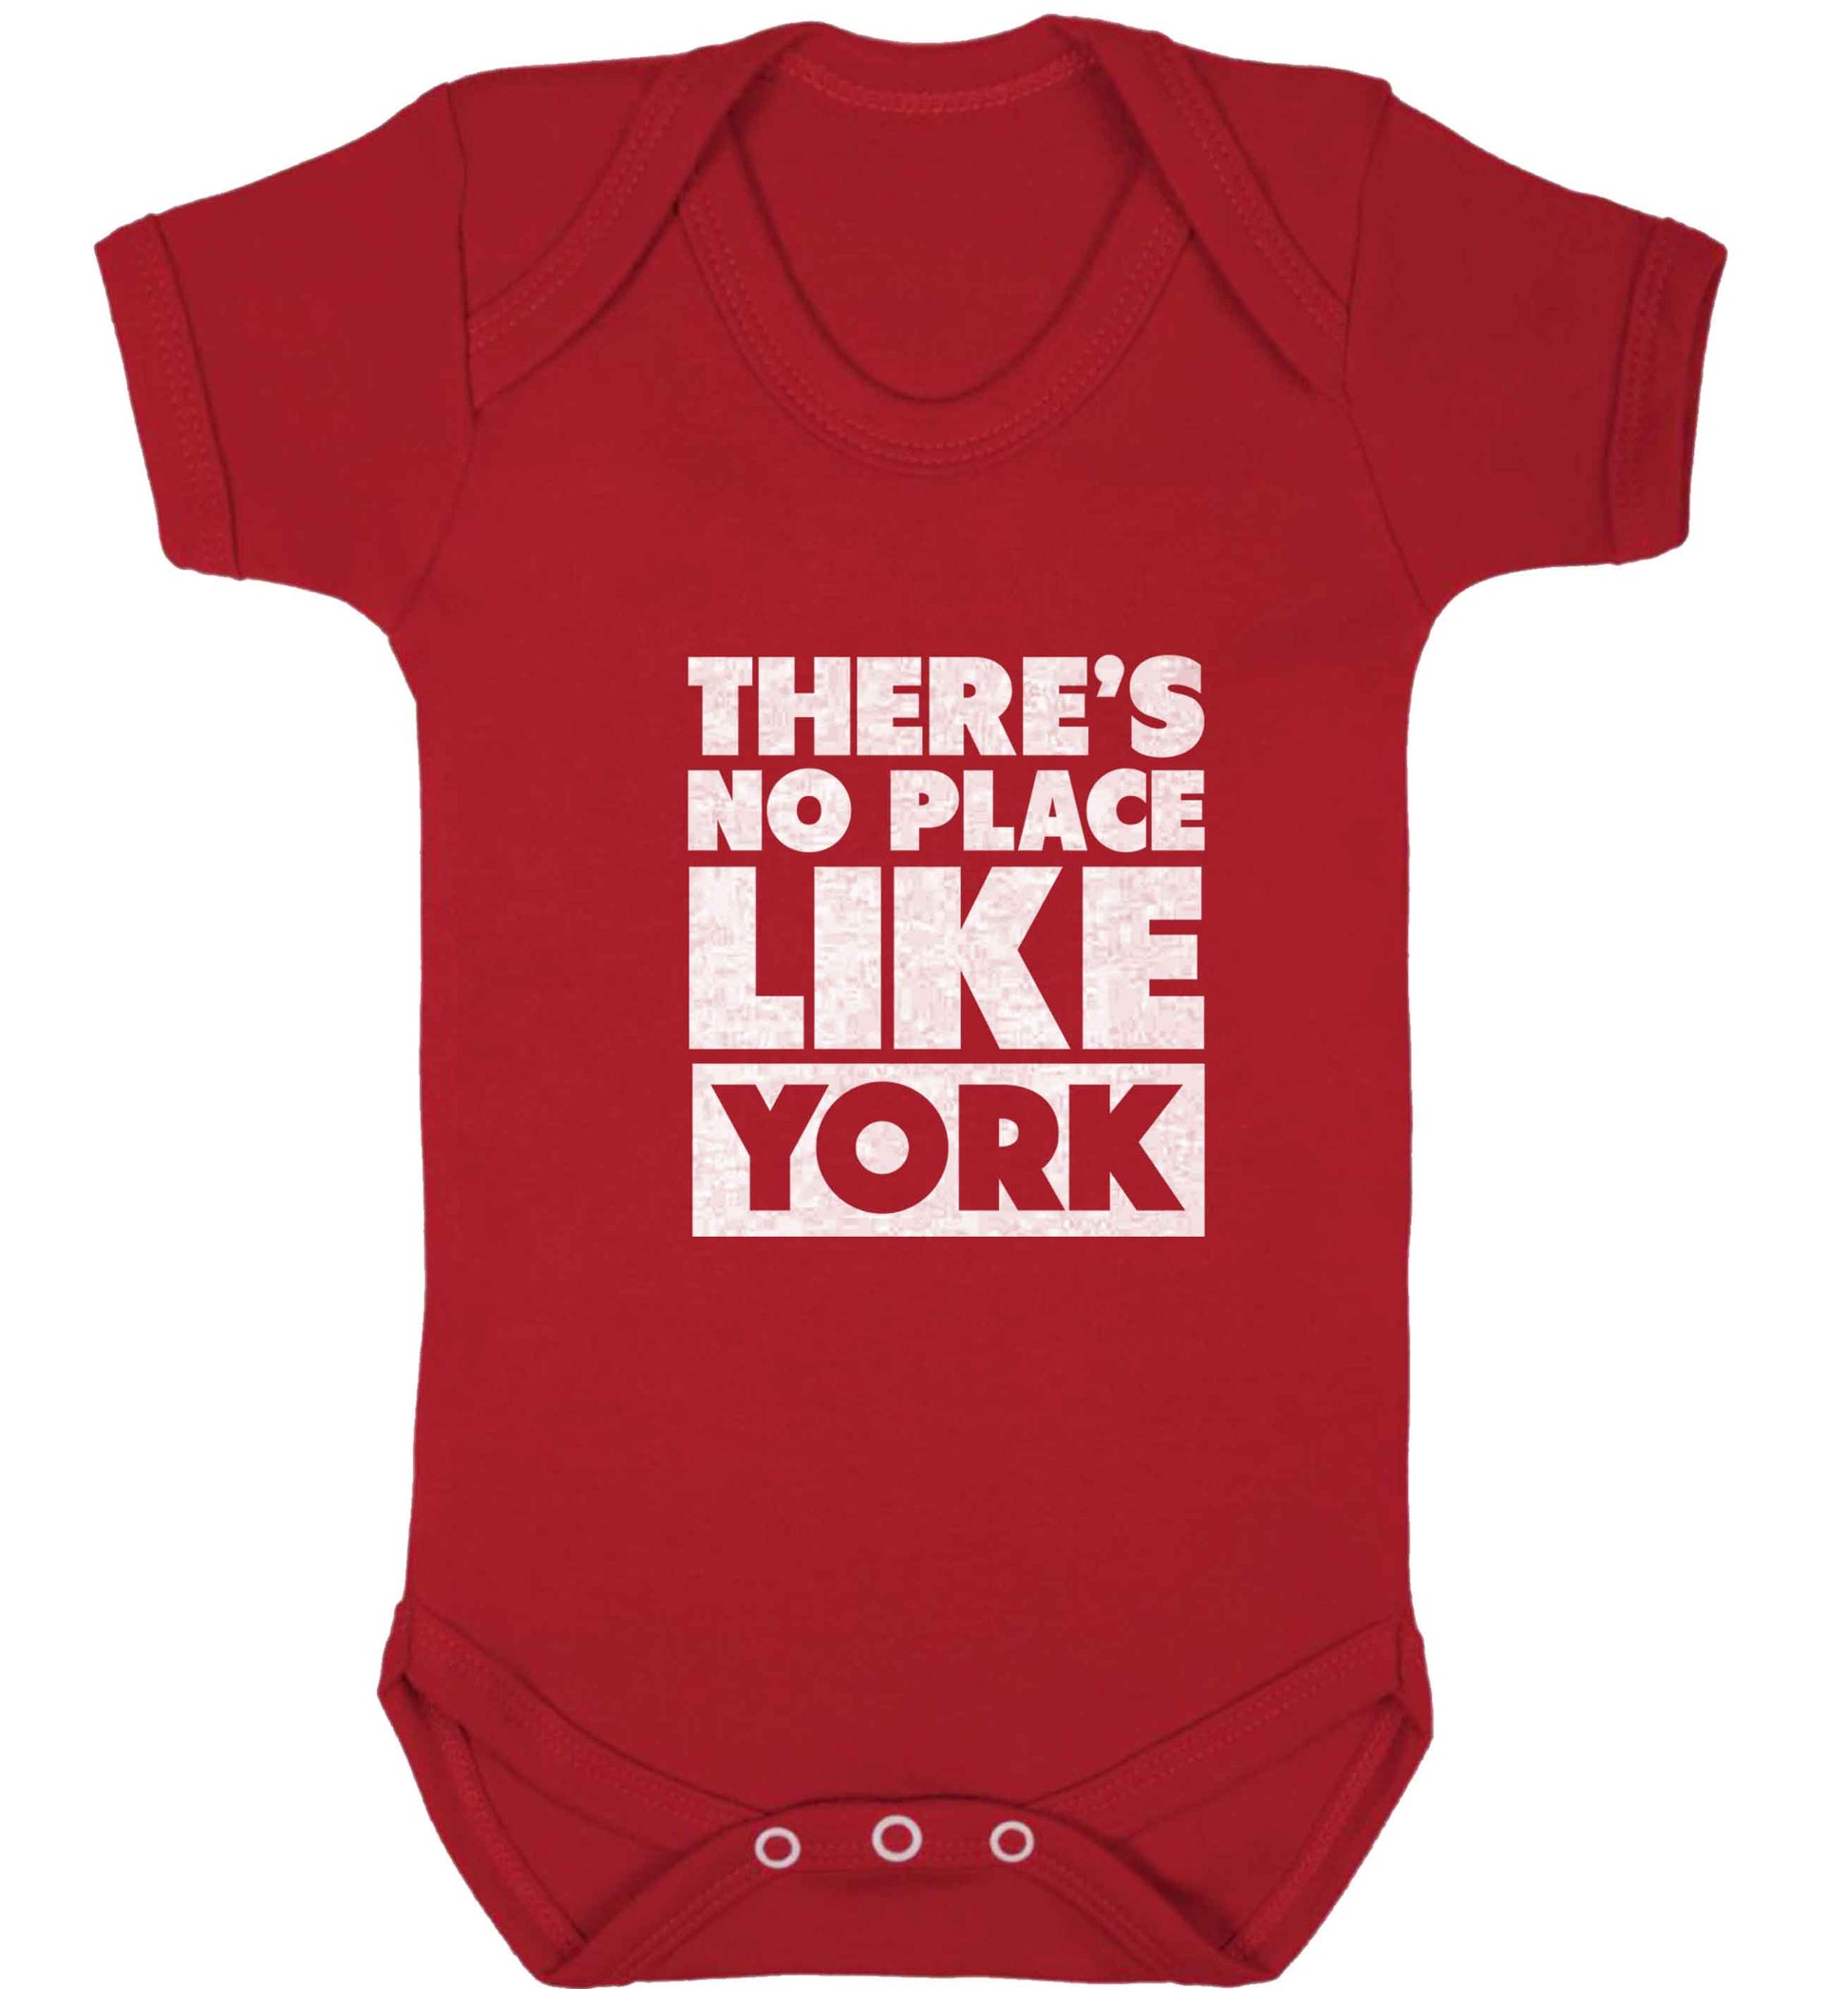 There's no place like york baby vest red 18-24 months